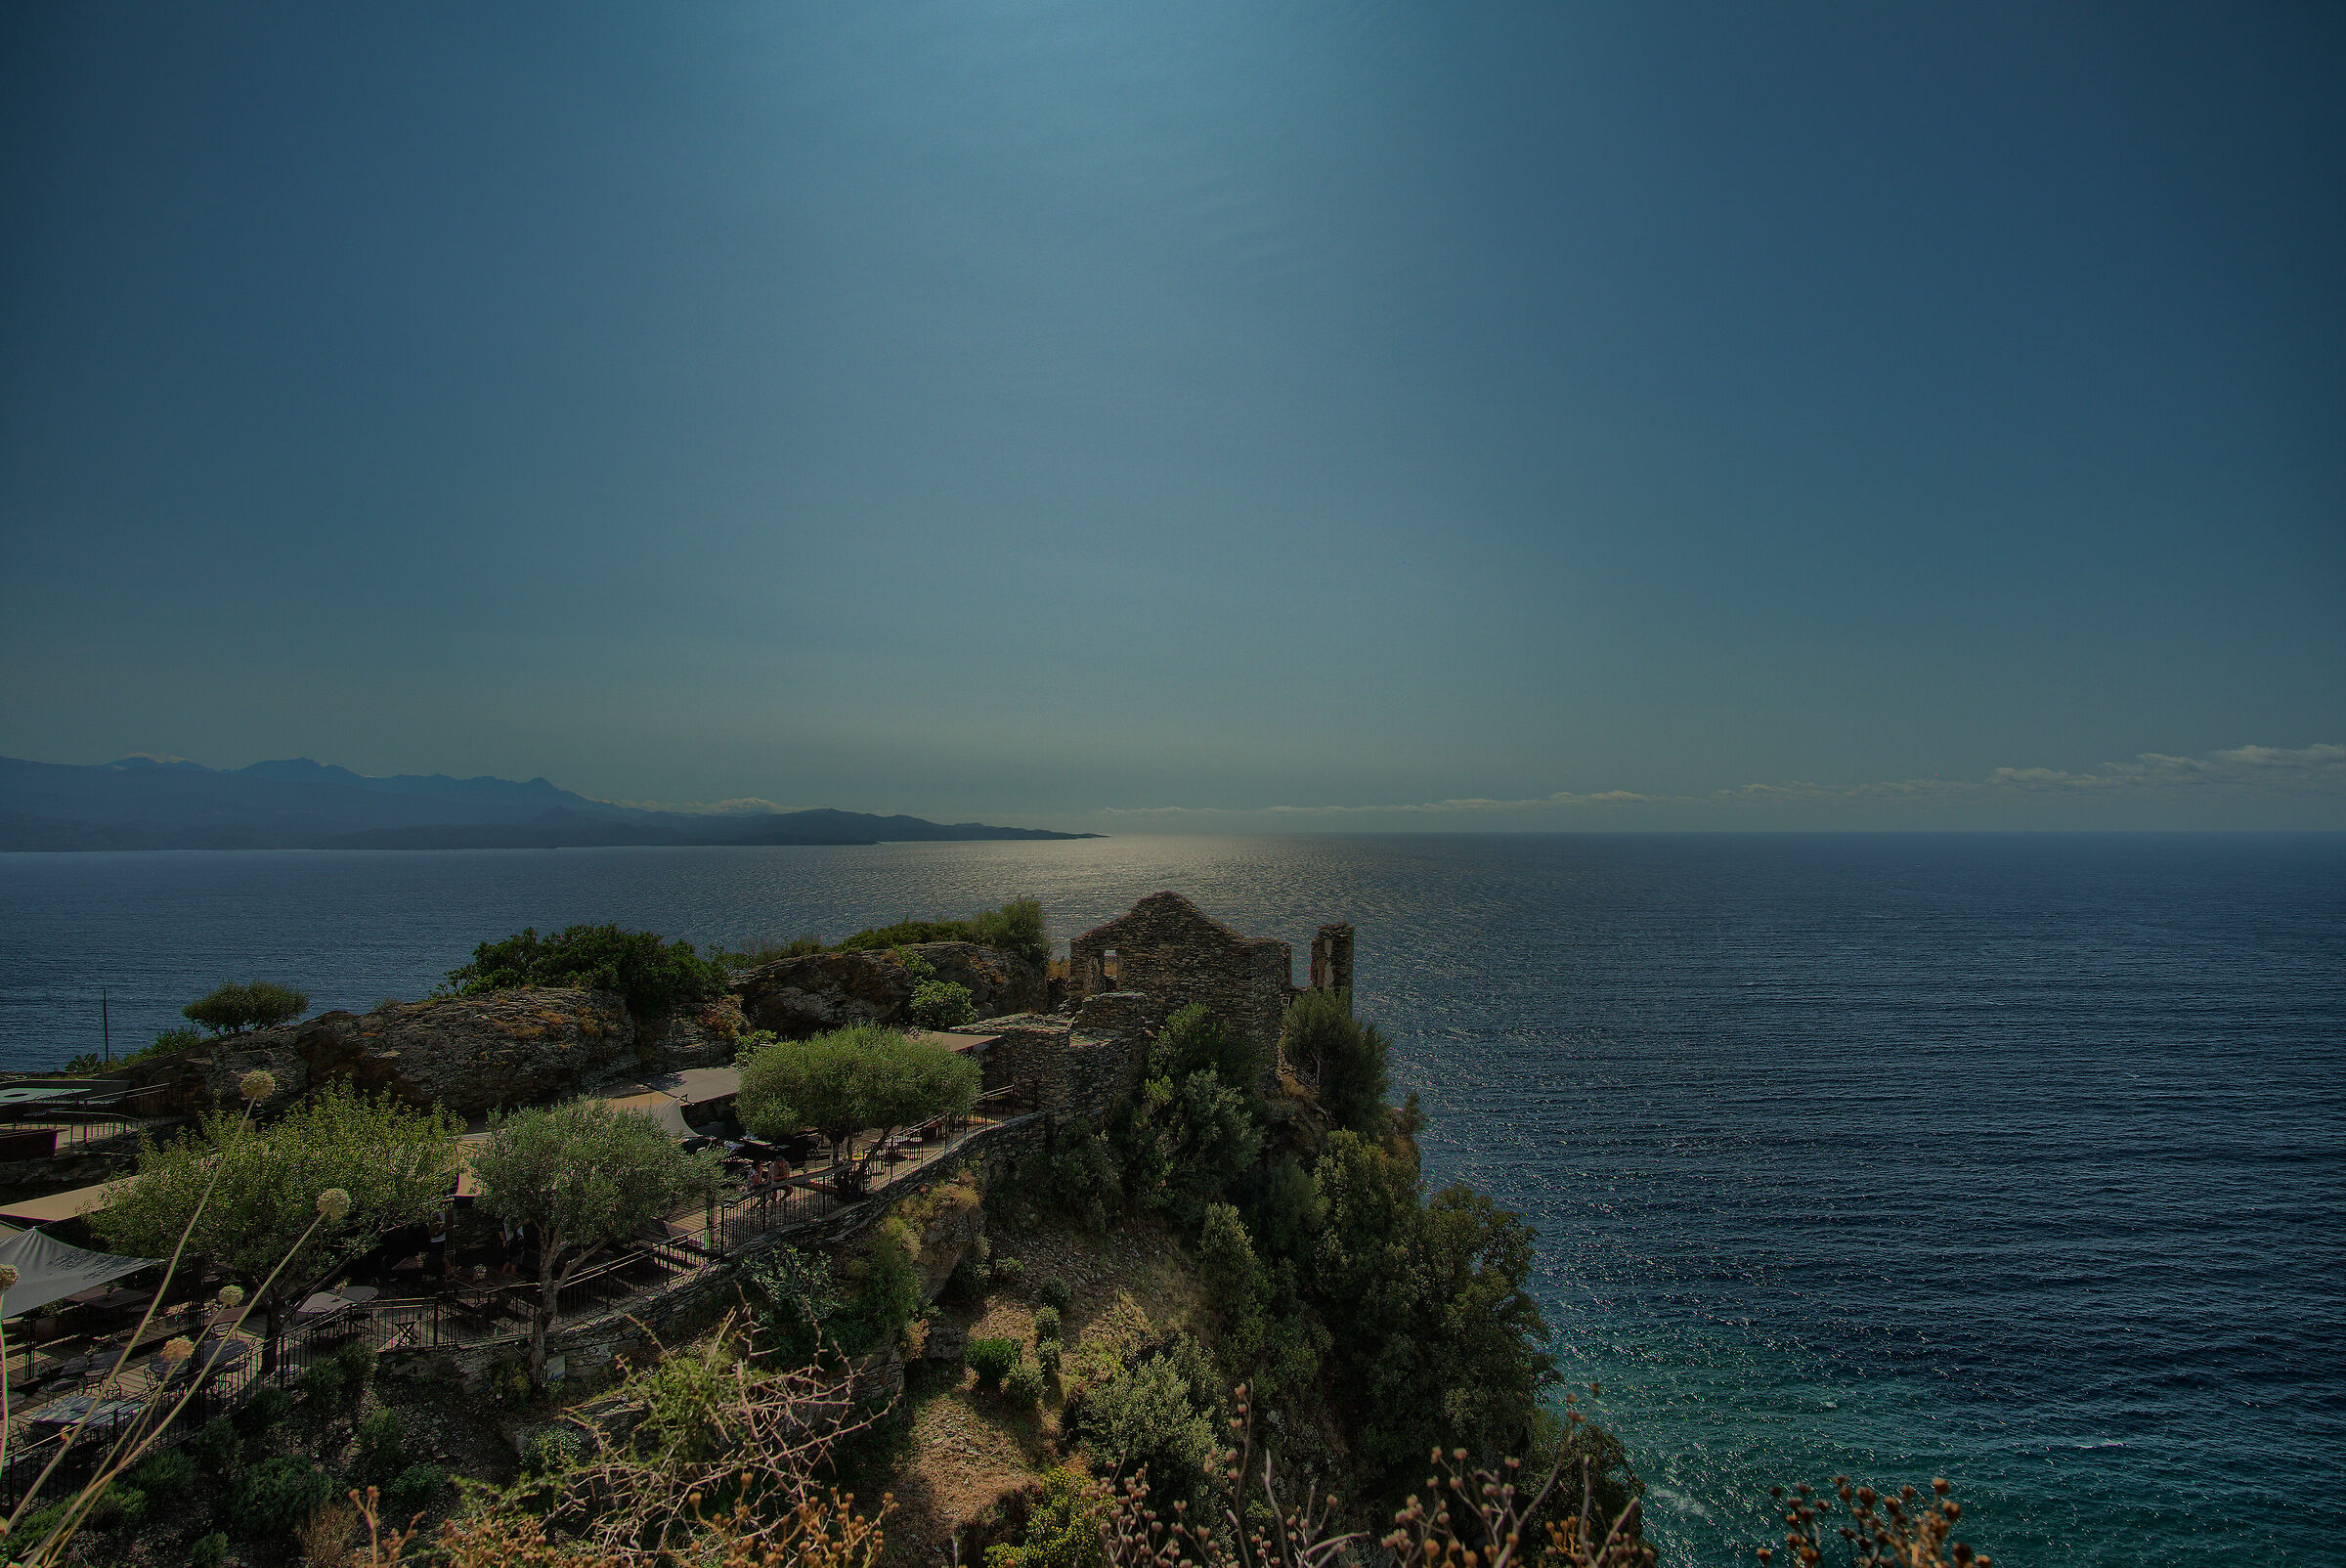 Panorama from The Tower of Nonza...